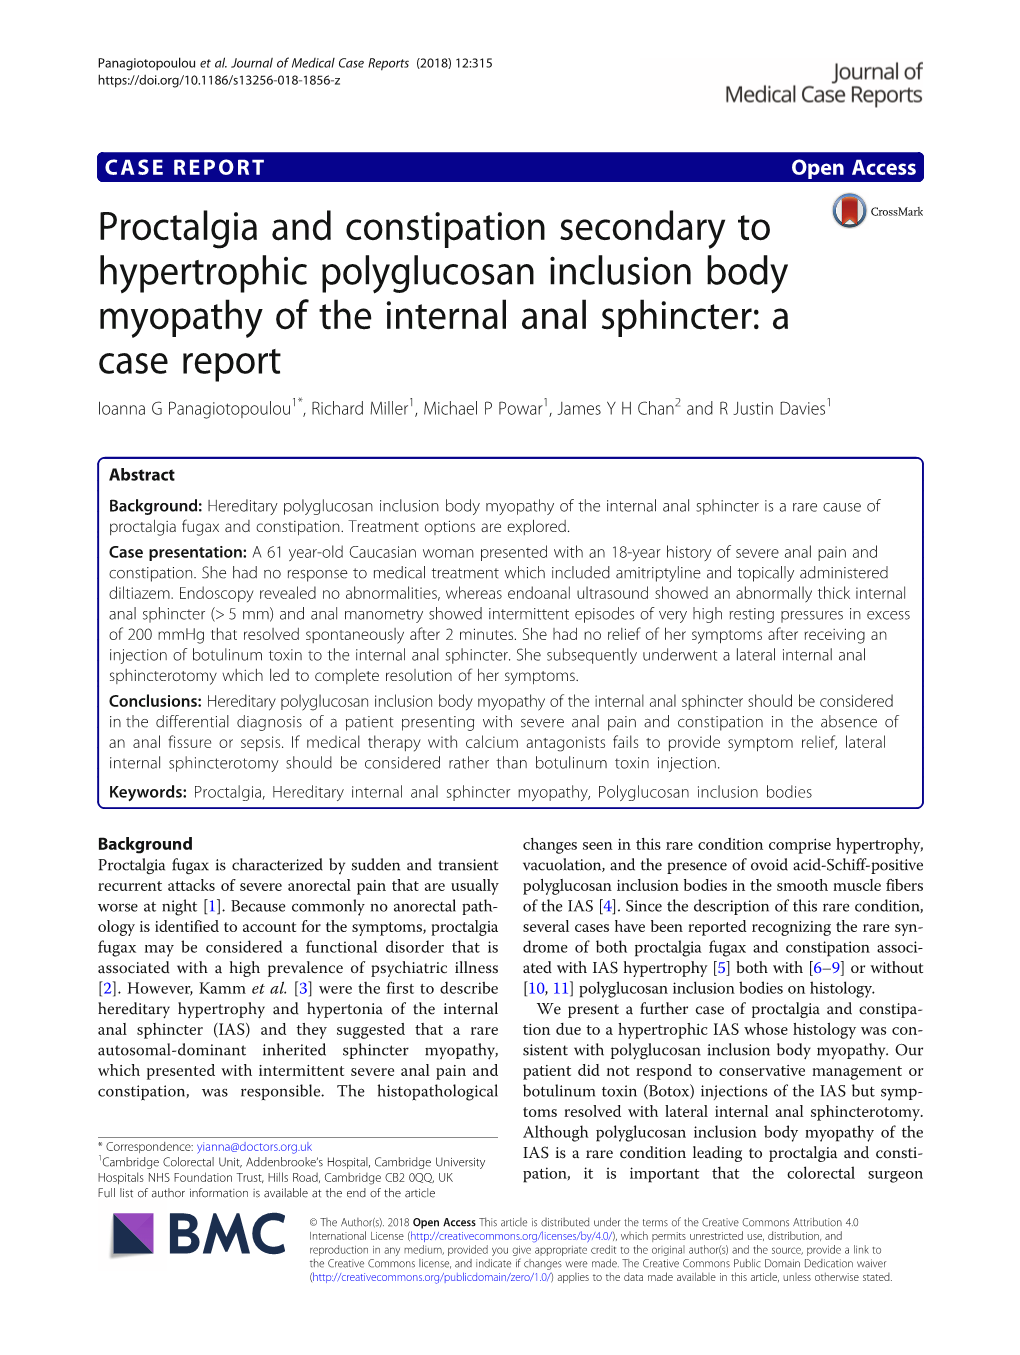 Proctalgia and Constipation Secondary to Hypertrophic Polyglucosan Inclusion Body Myopathy of the Internal Anal Sphincter